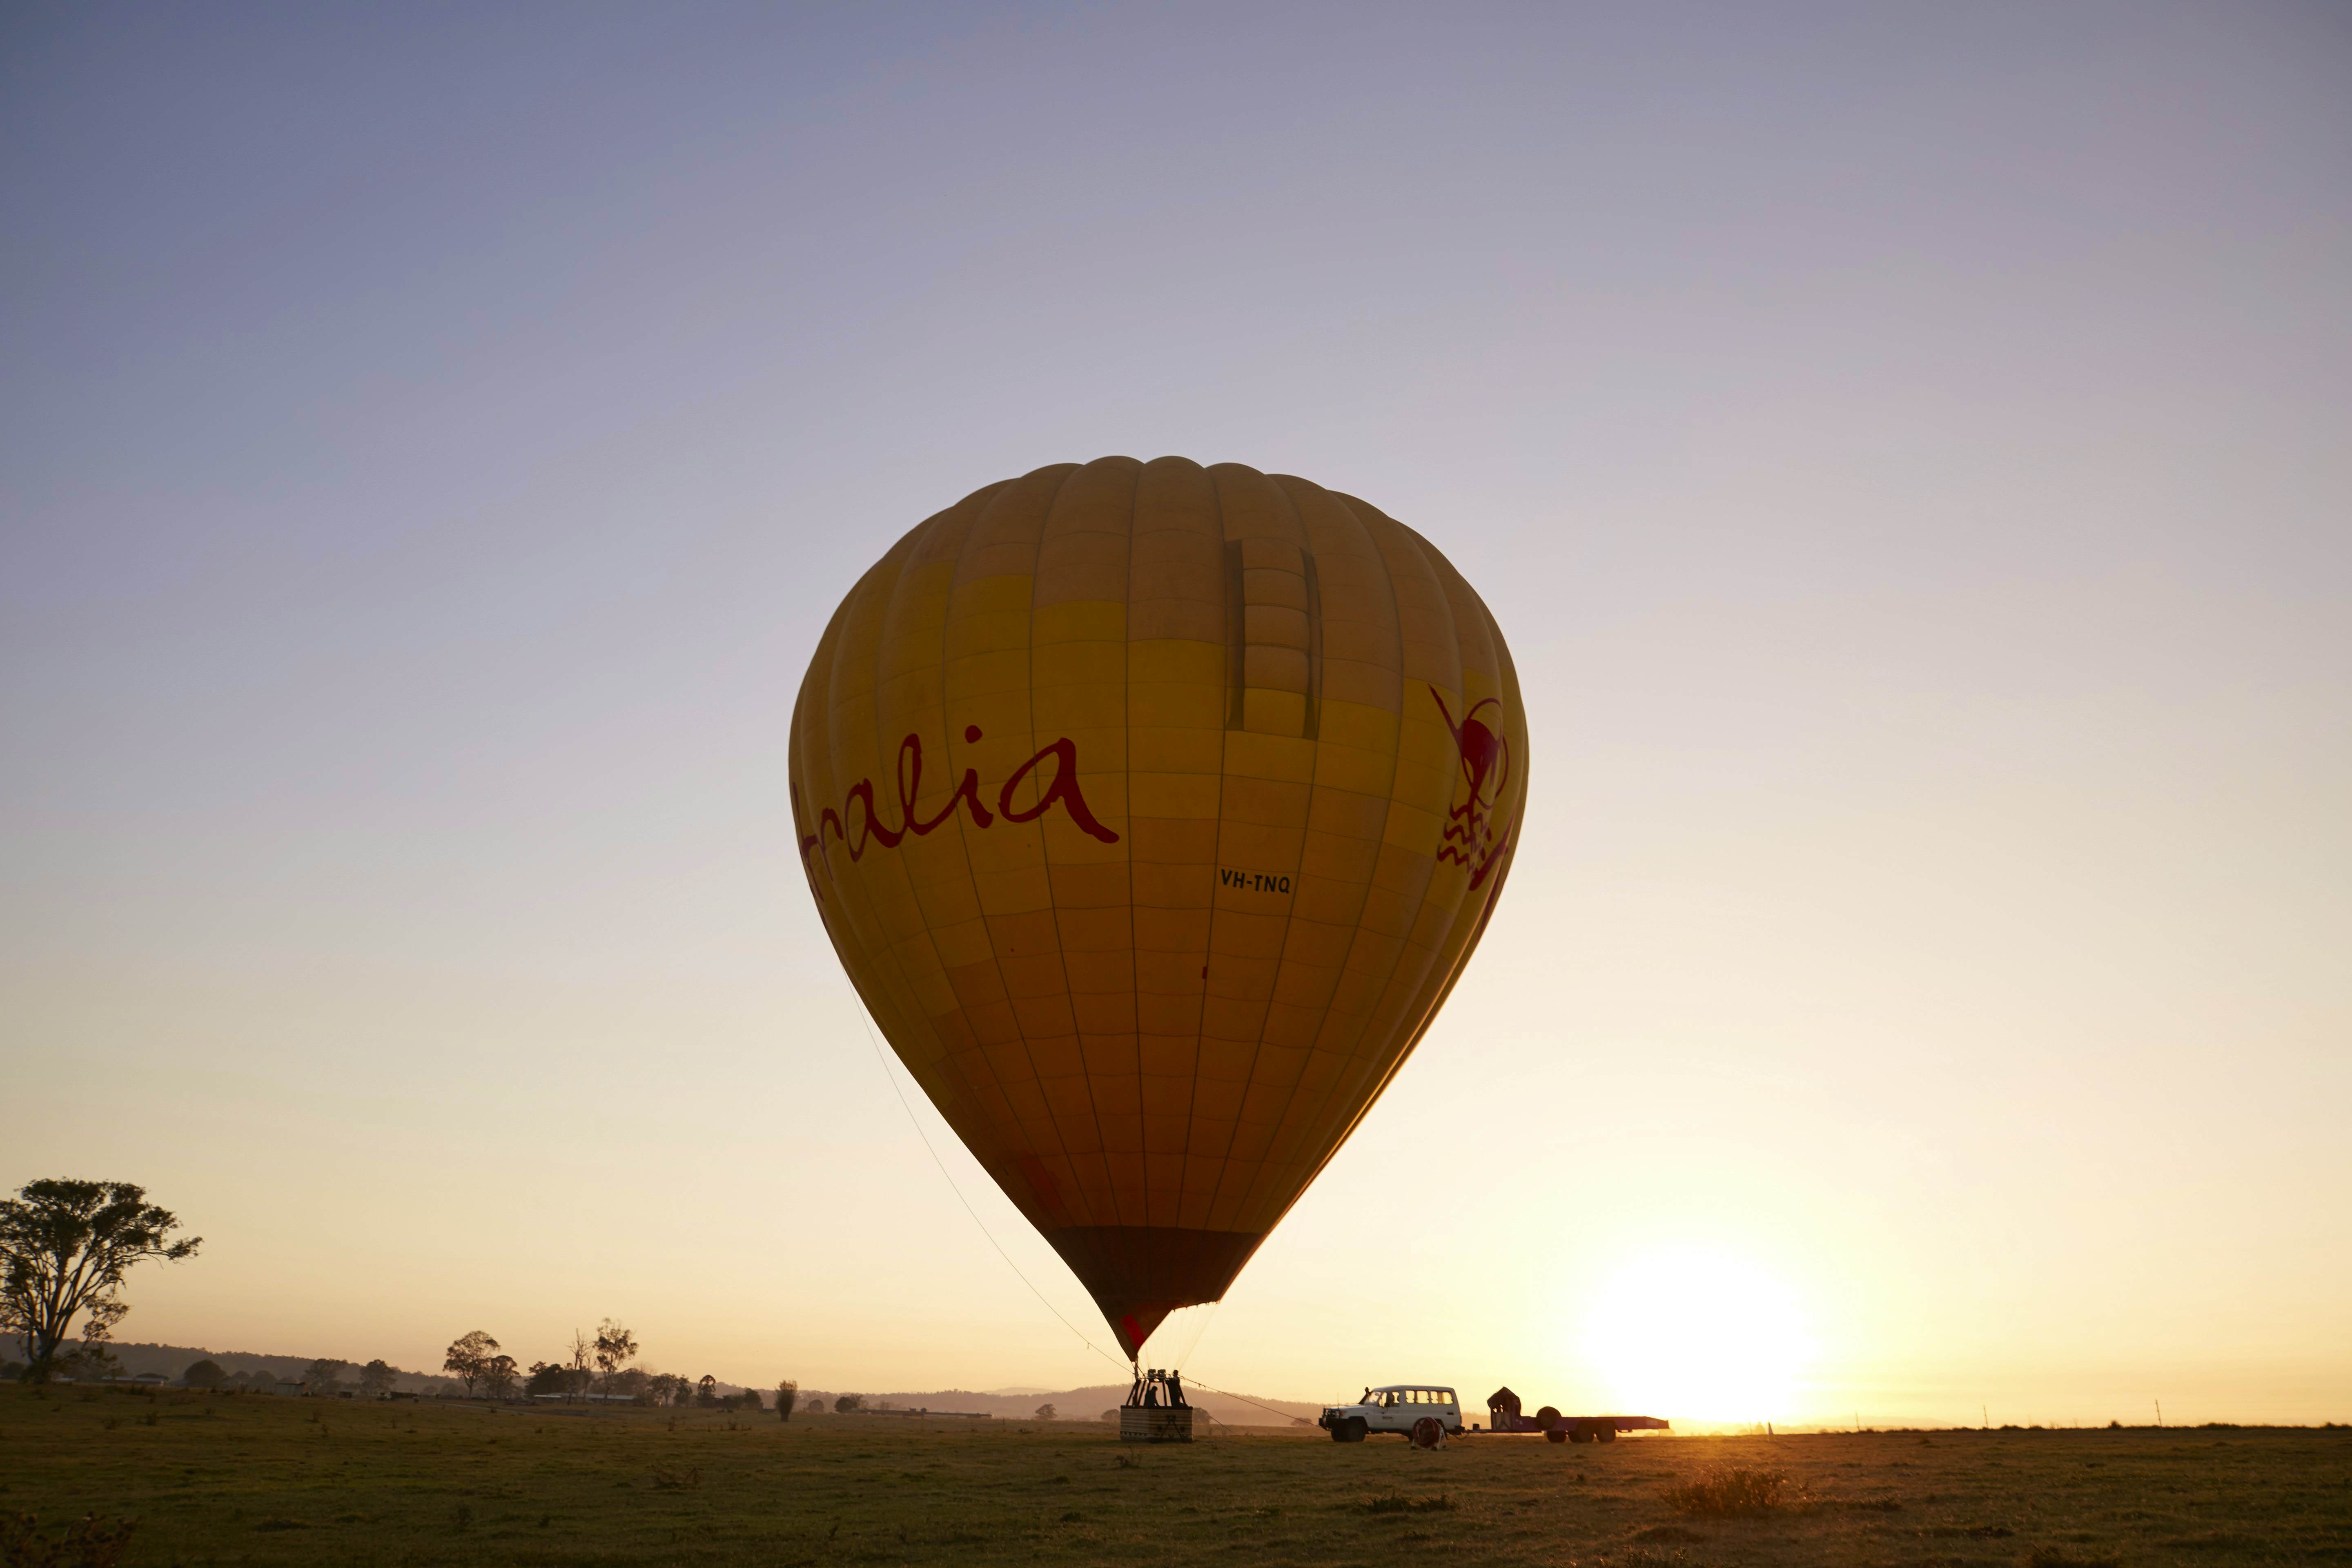 Hot Air Ballooning from the Gold Coast